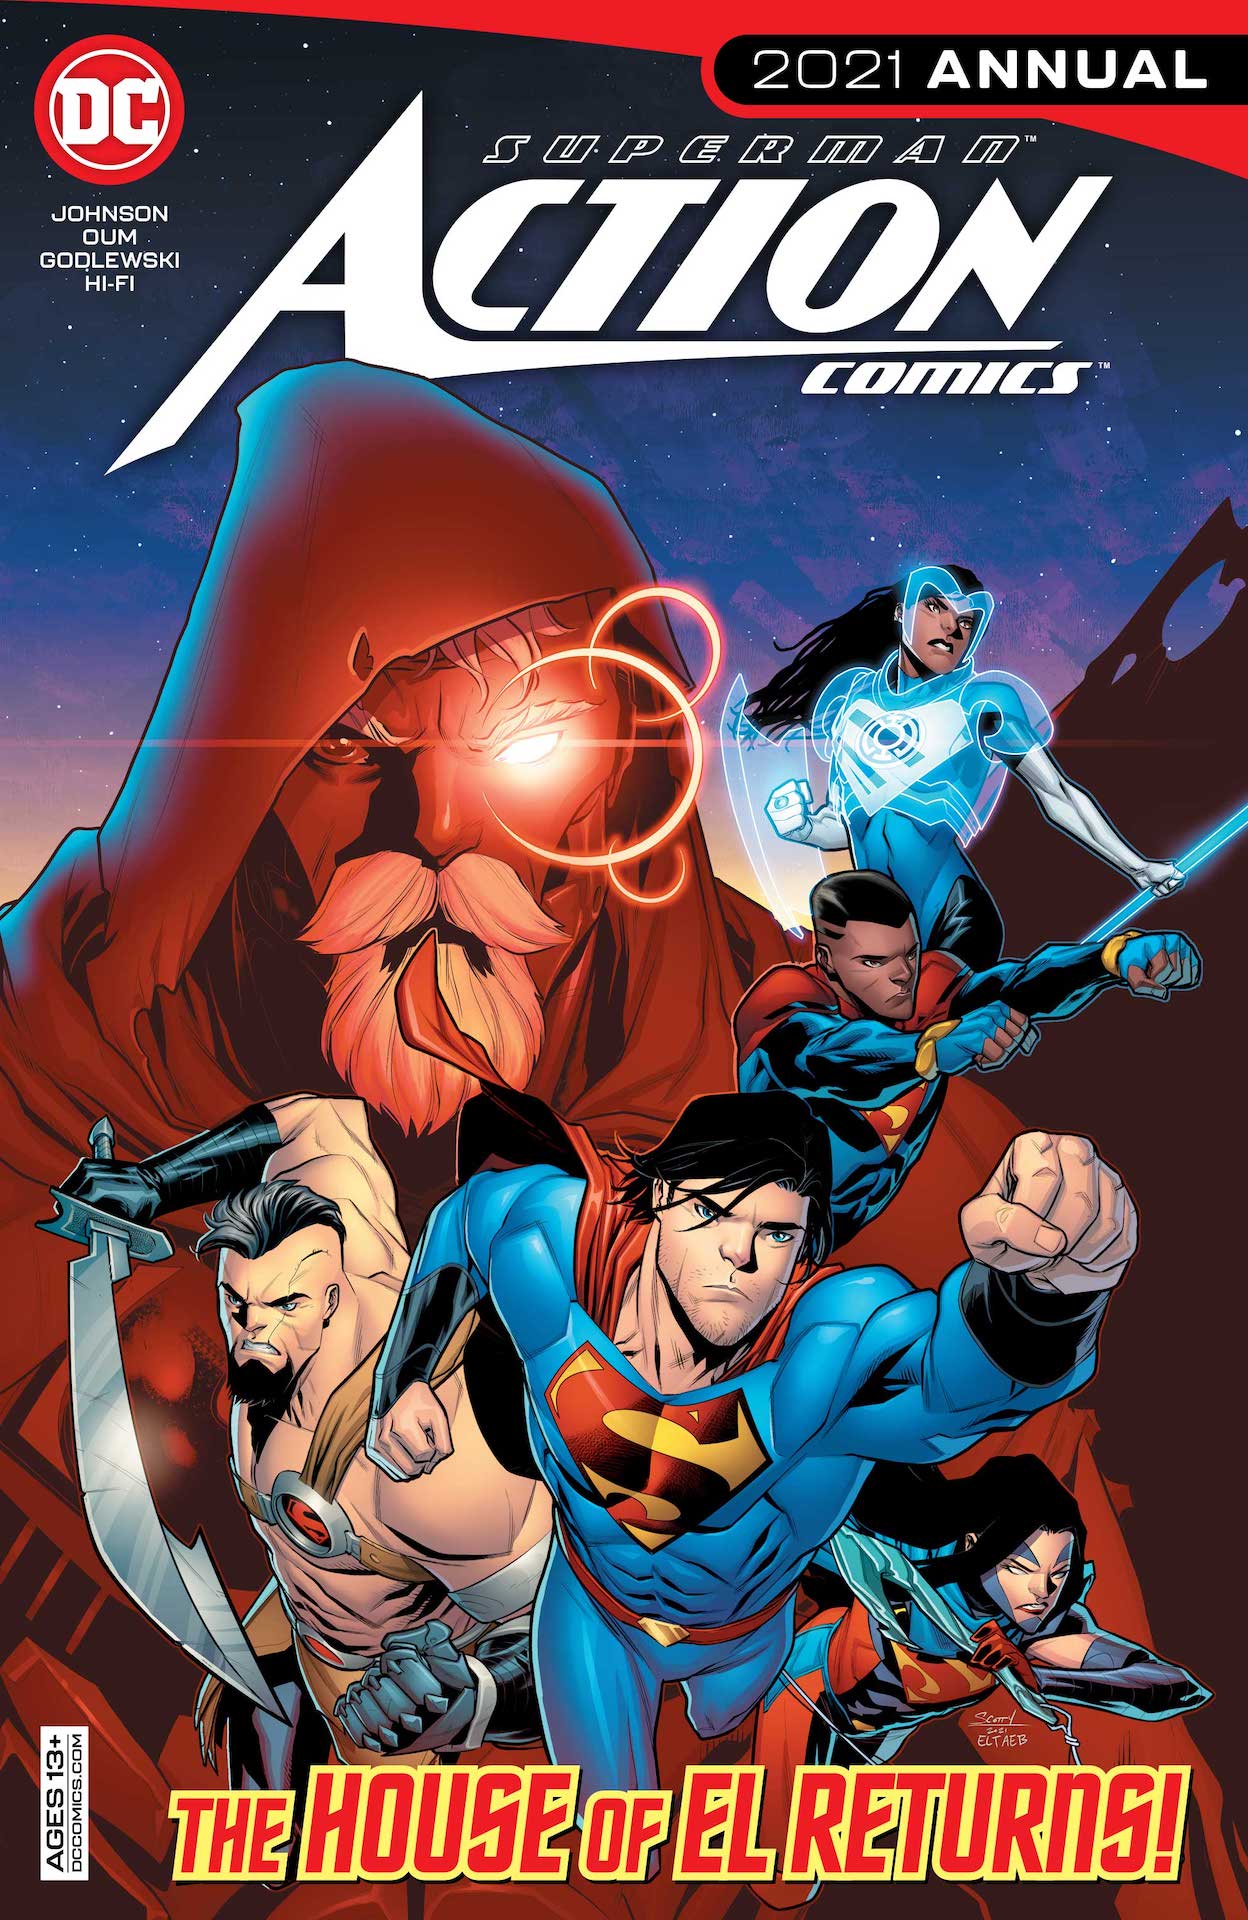 DC Preview: Action Comics Annual #1